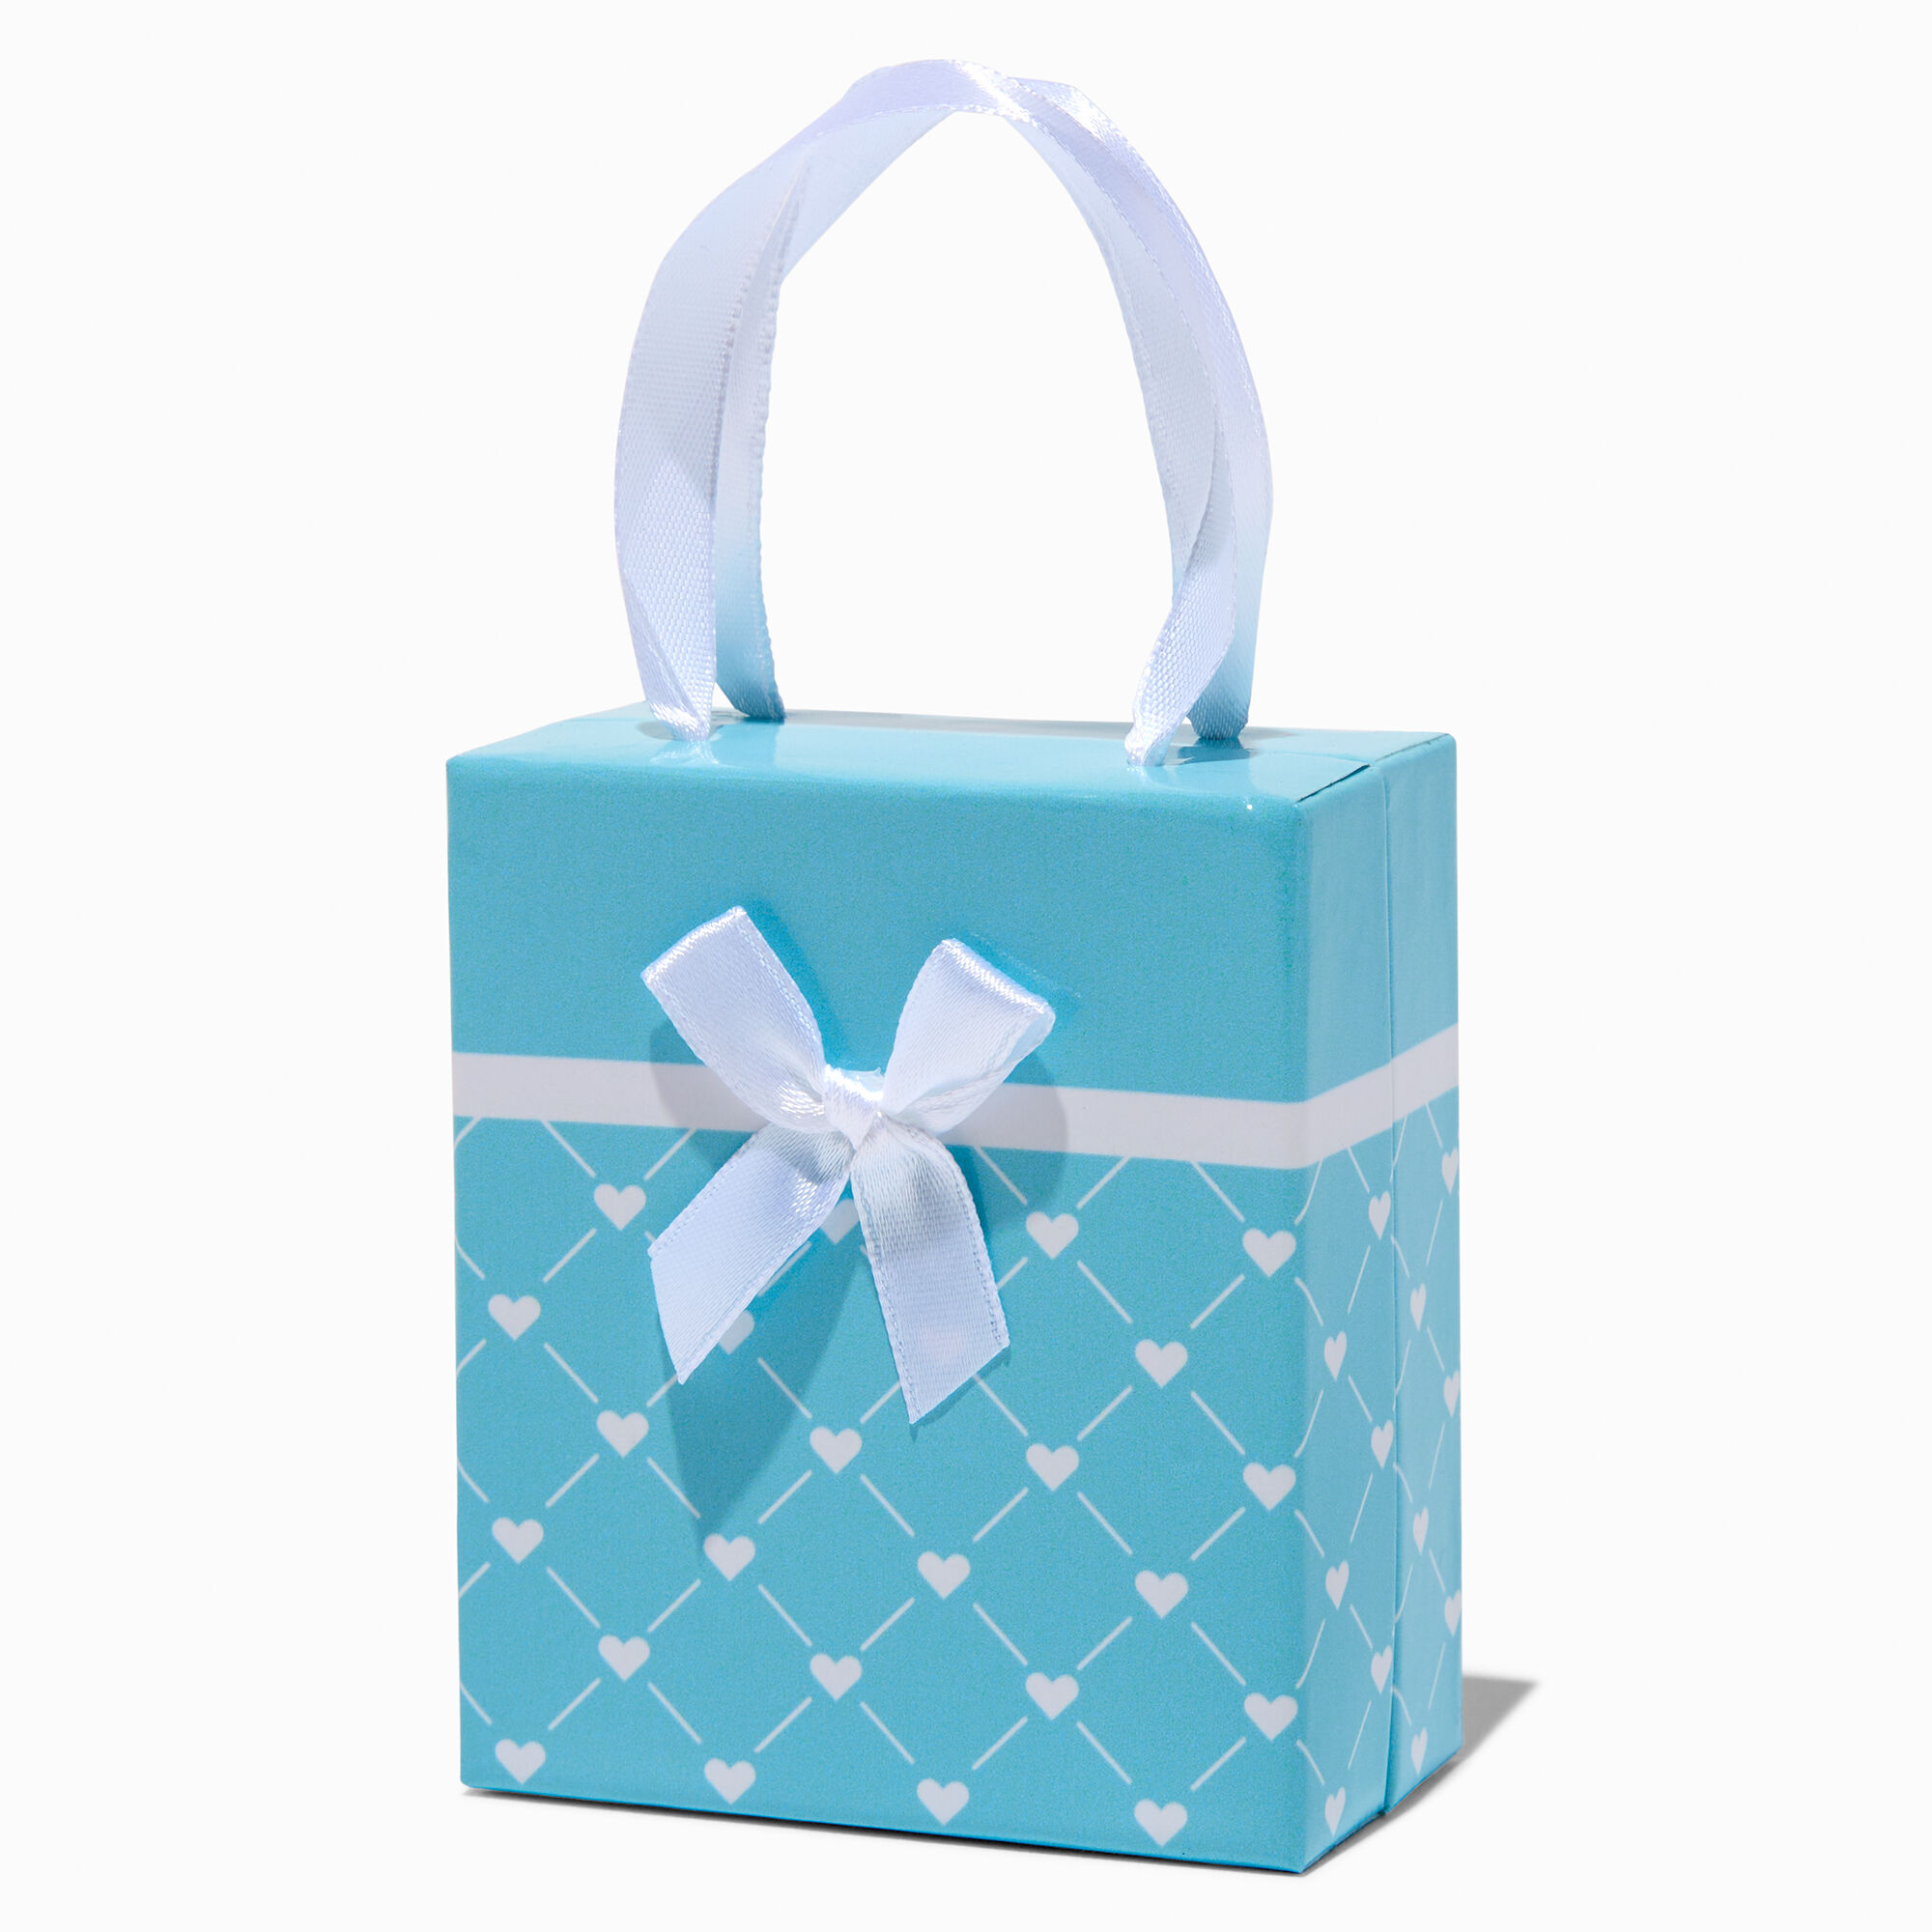 View Claires Heart Lattice Small Gift Box Blue information